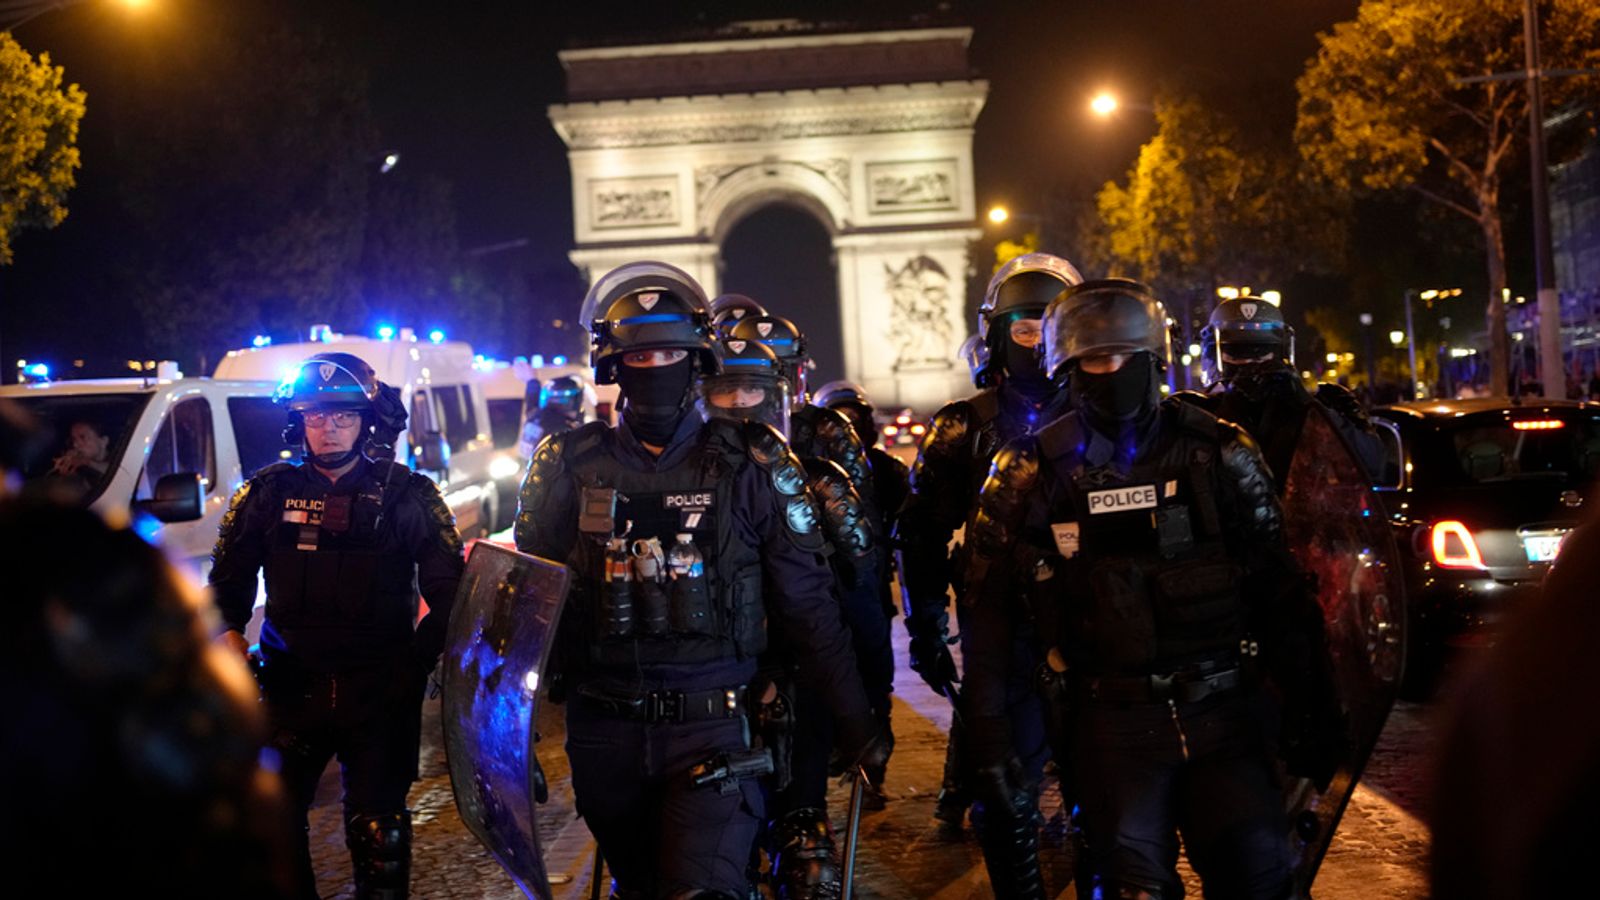 Teenage rioter says French police should wear body cameras to rebuild trust